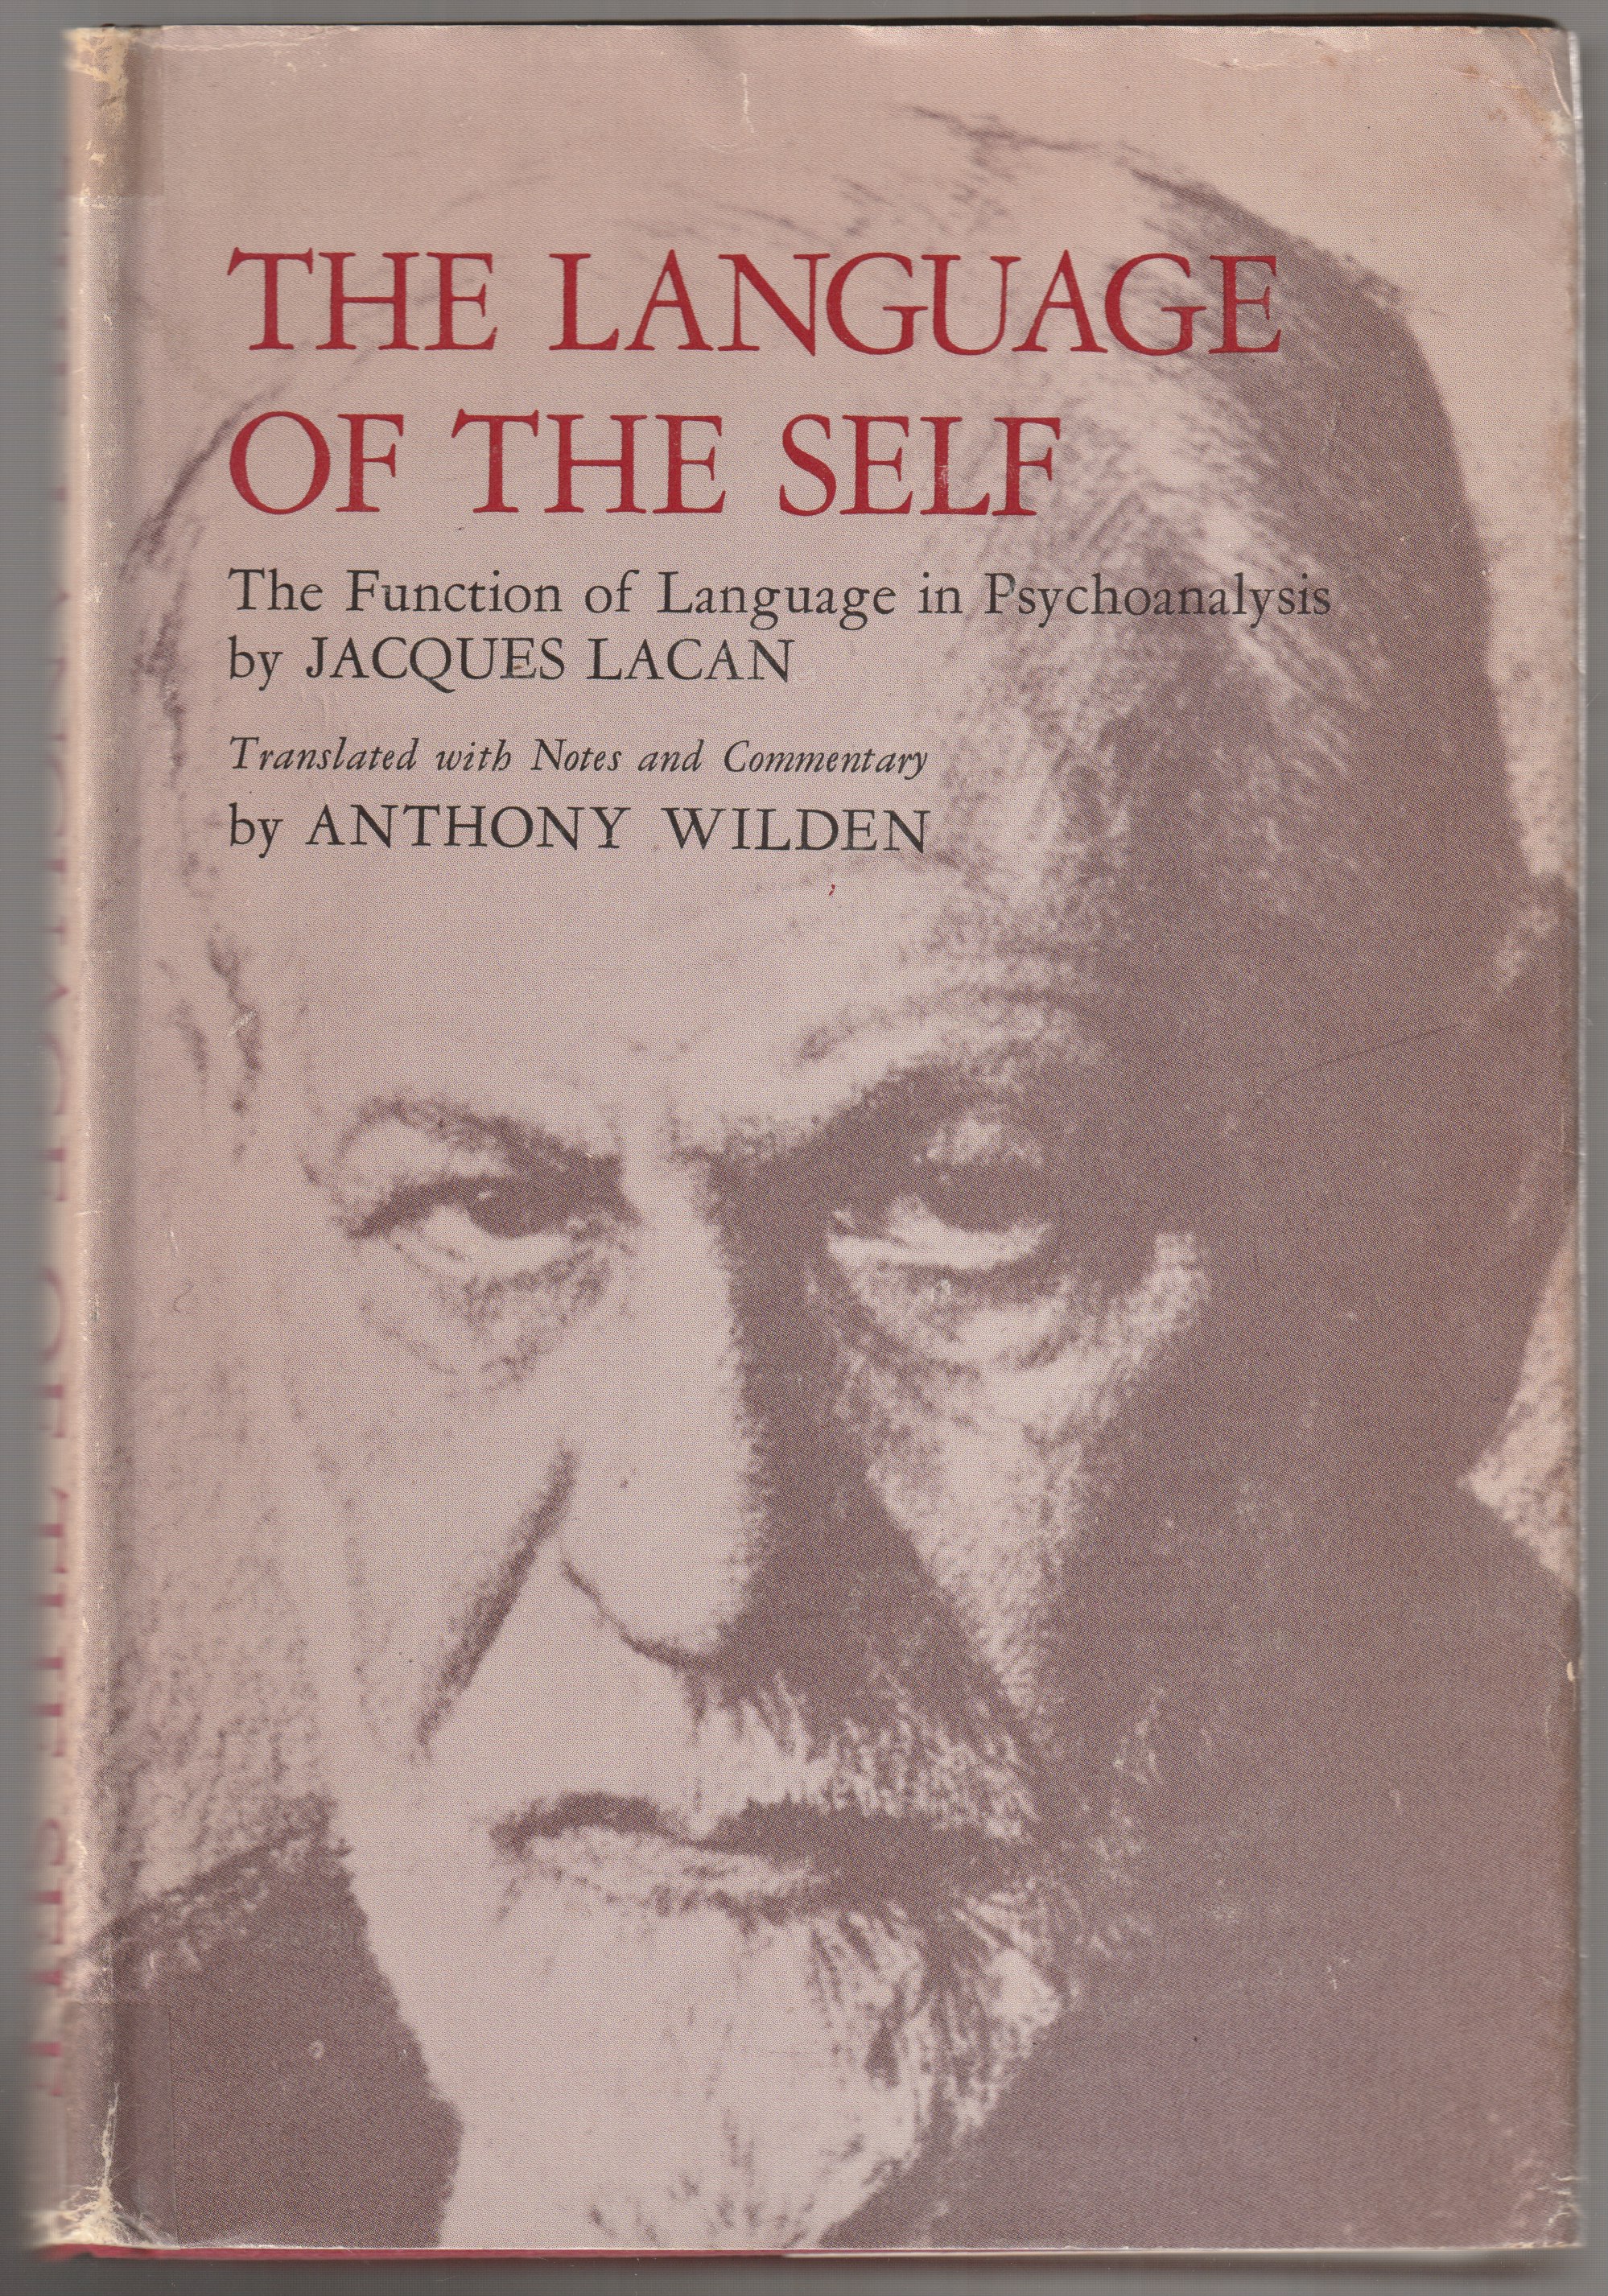 The language of the self : the function of language in psychoanalysis.